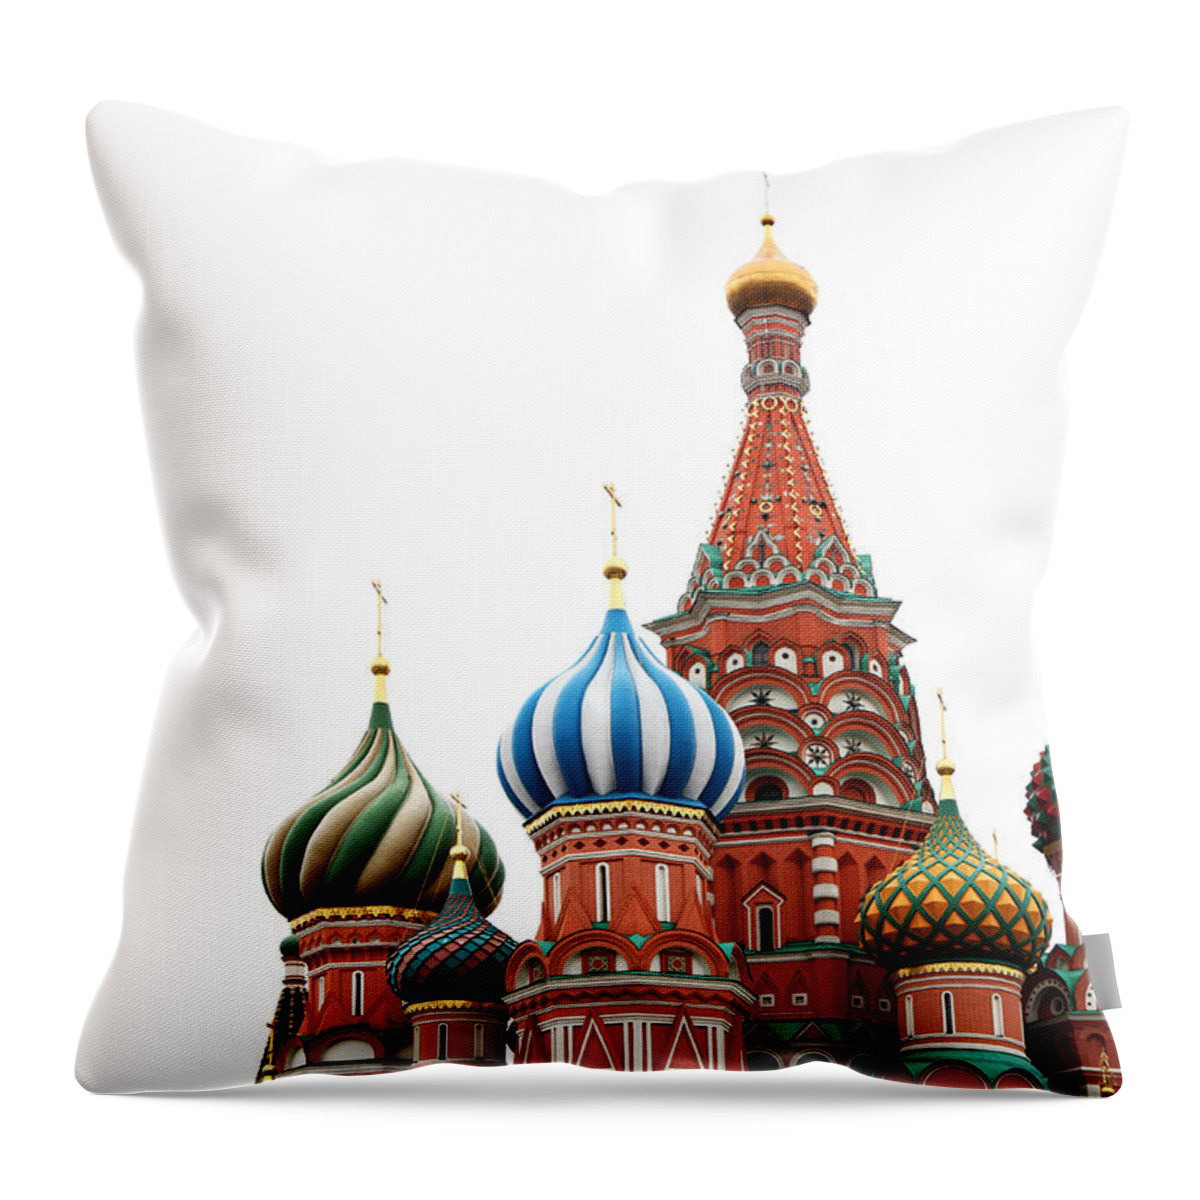 Built Structure Throw Pillow featuring the photograph St. Basil Cathedral #1 by Savushkin